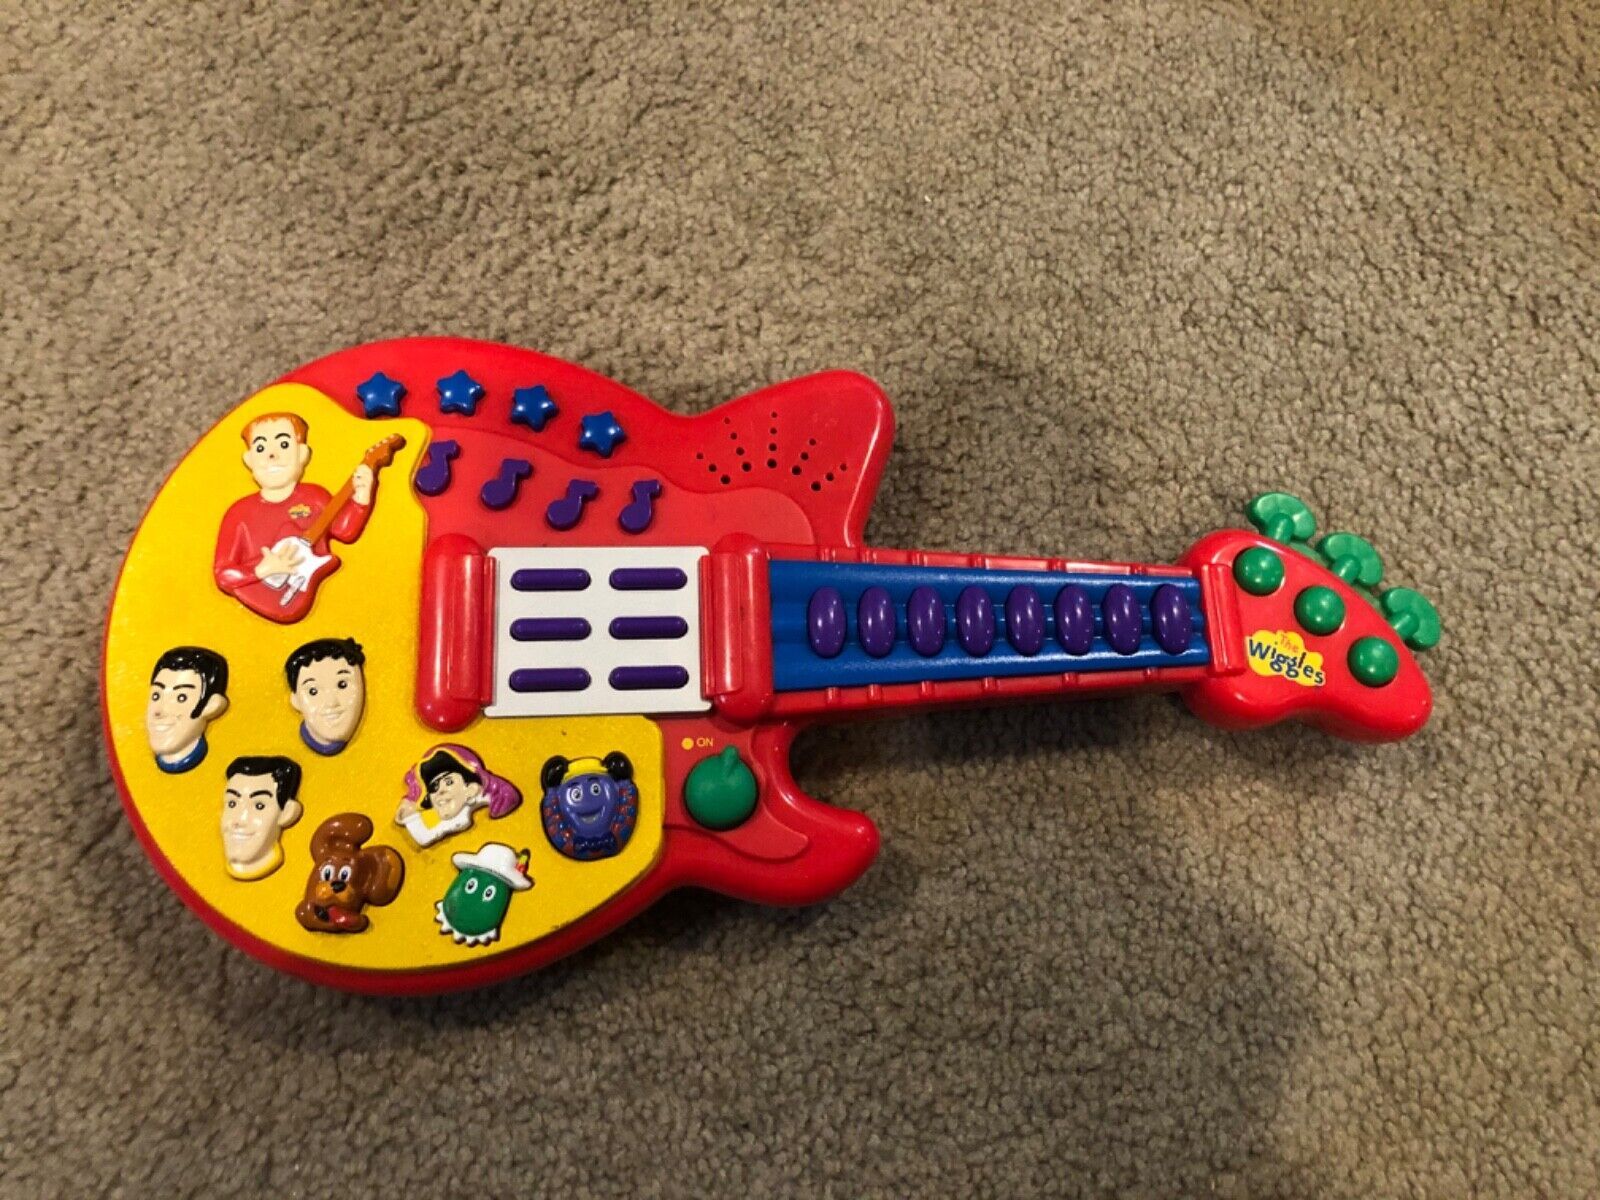 The Wiggles Guitar Sing & Dance Red Play Toy Kids 2003 Musical Instrument - $27.10